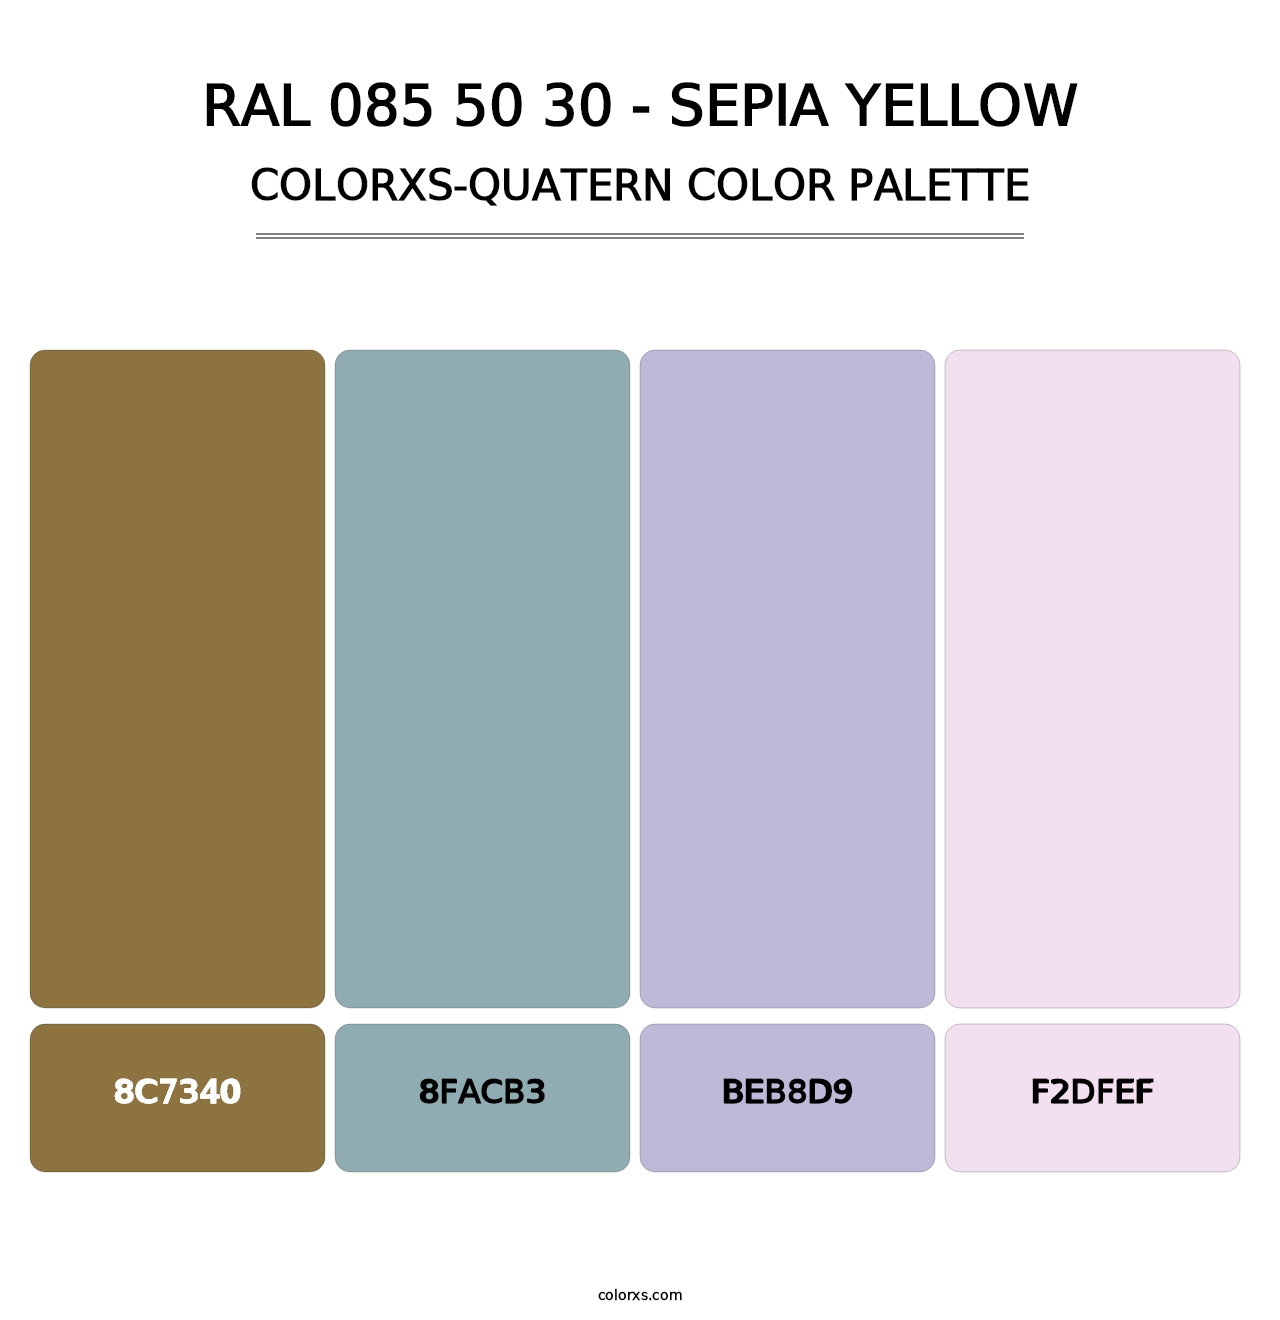 RAL 085 50 30 - Sepia Yellow - Colorxs Quatern Palette